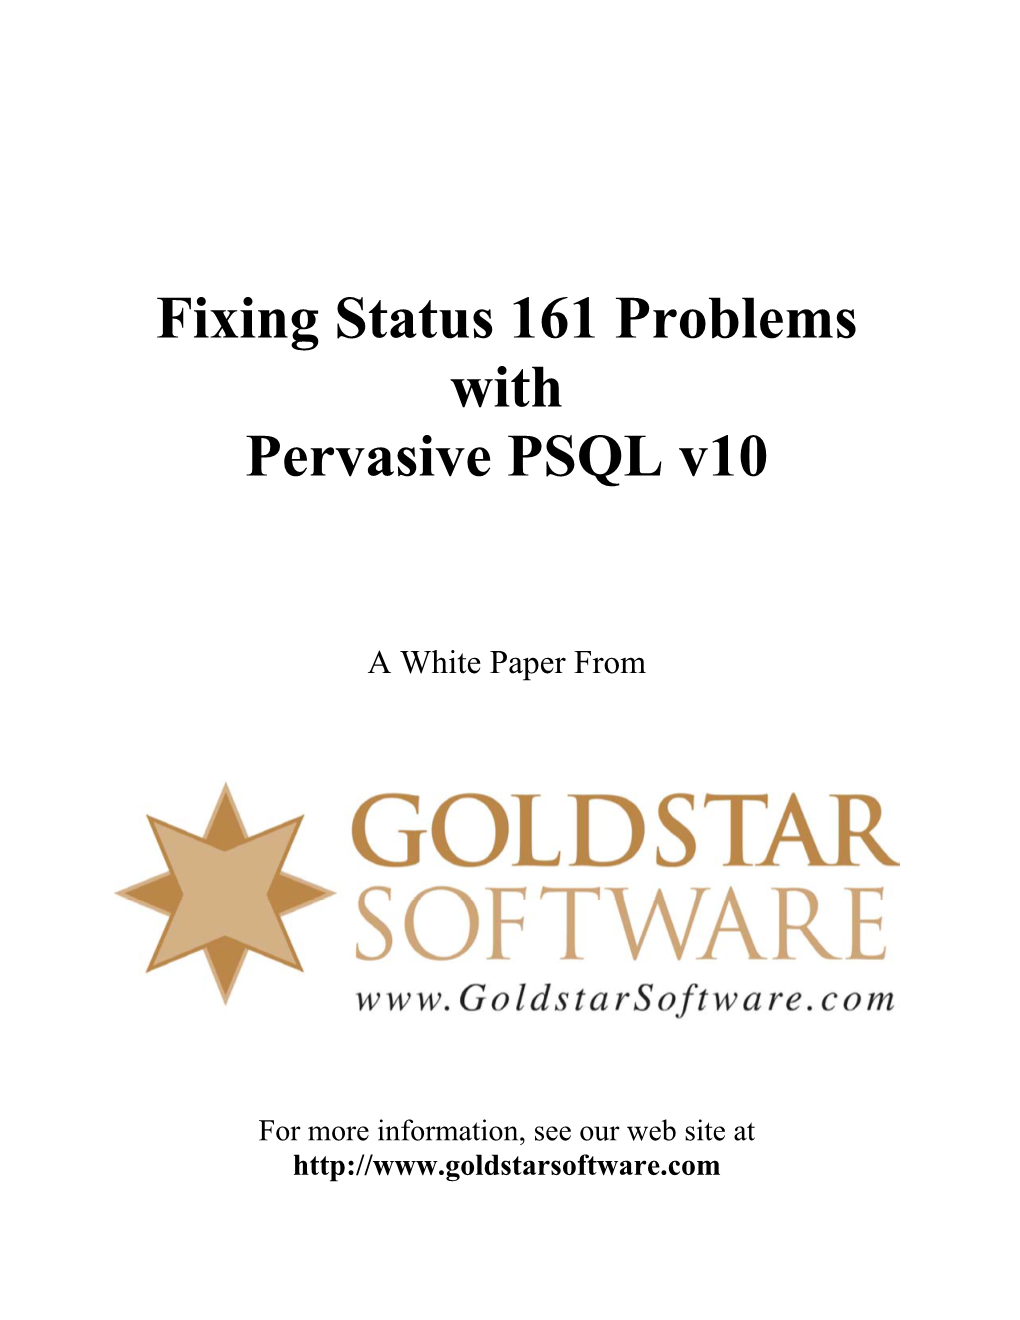 Fixing Status 161 Problems with Pervasive PSQL V10